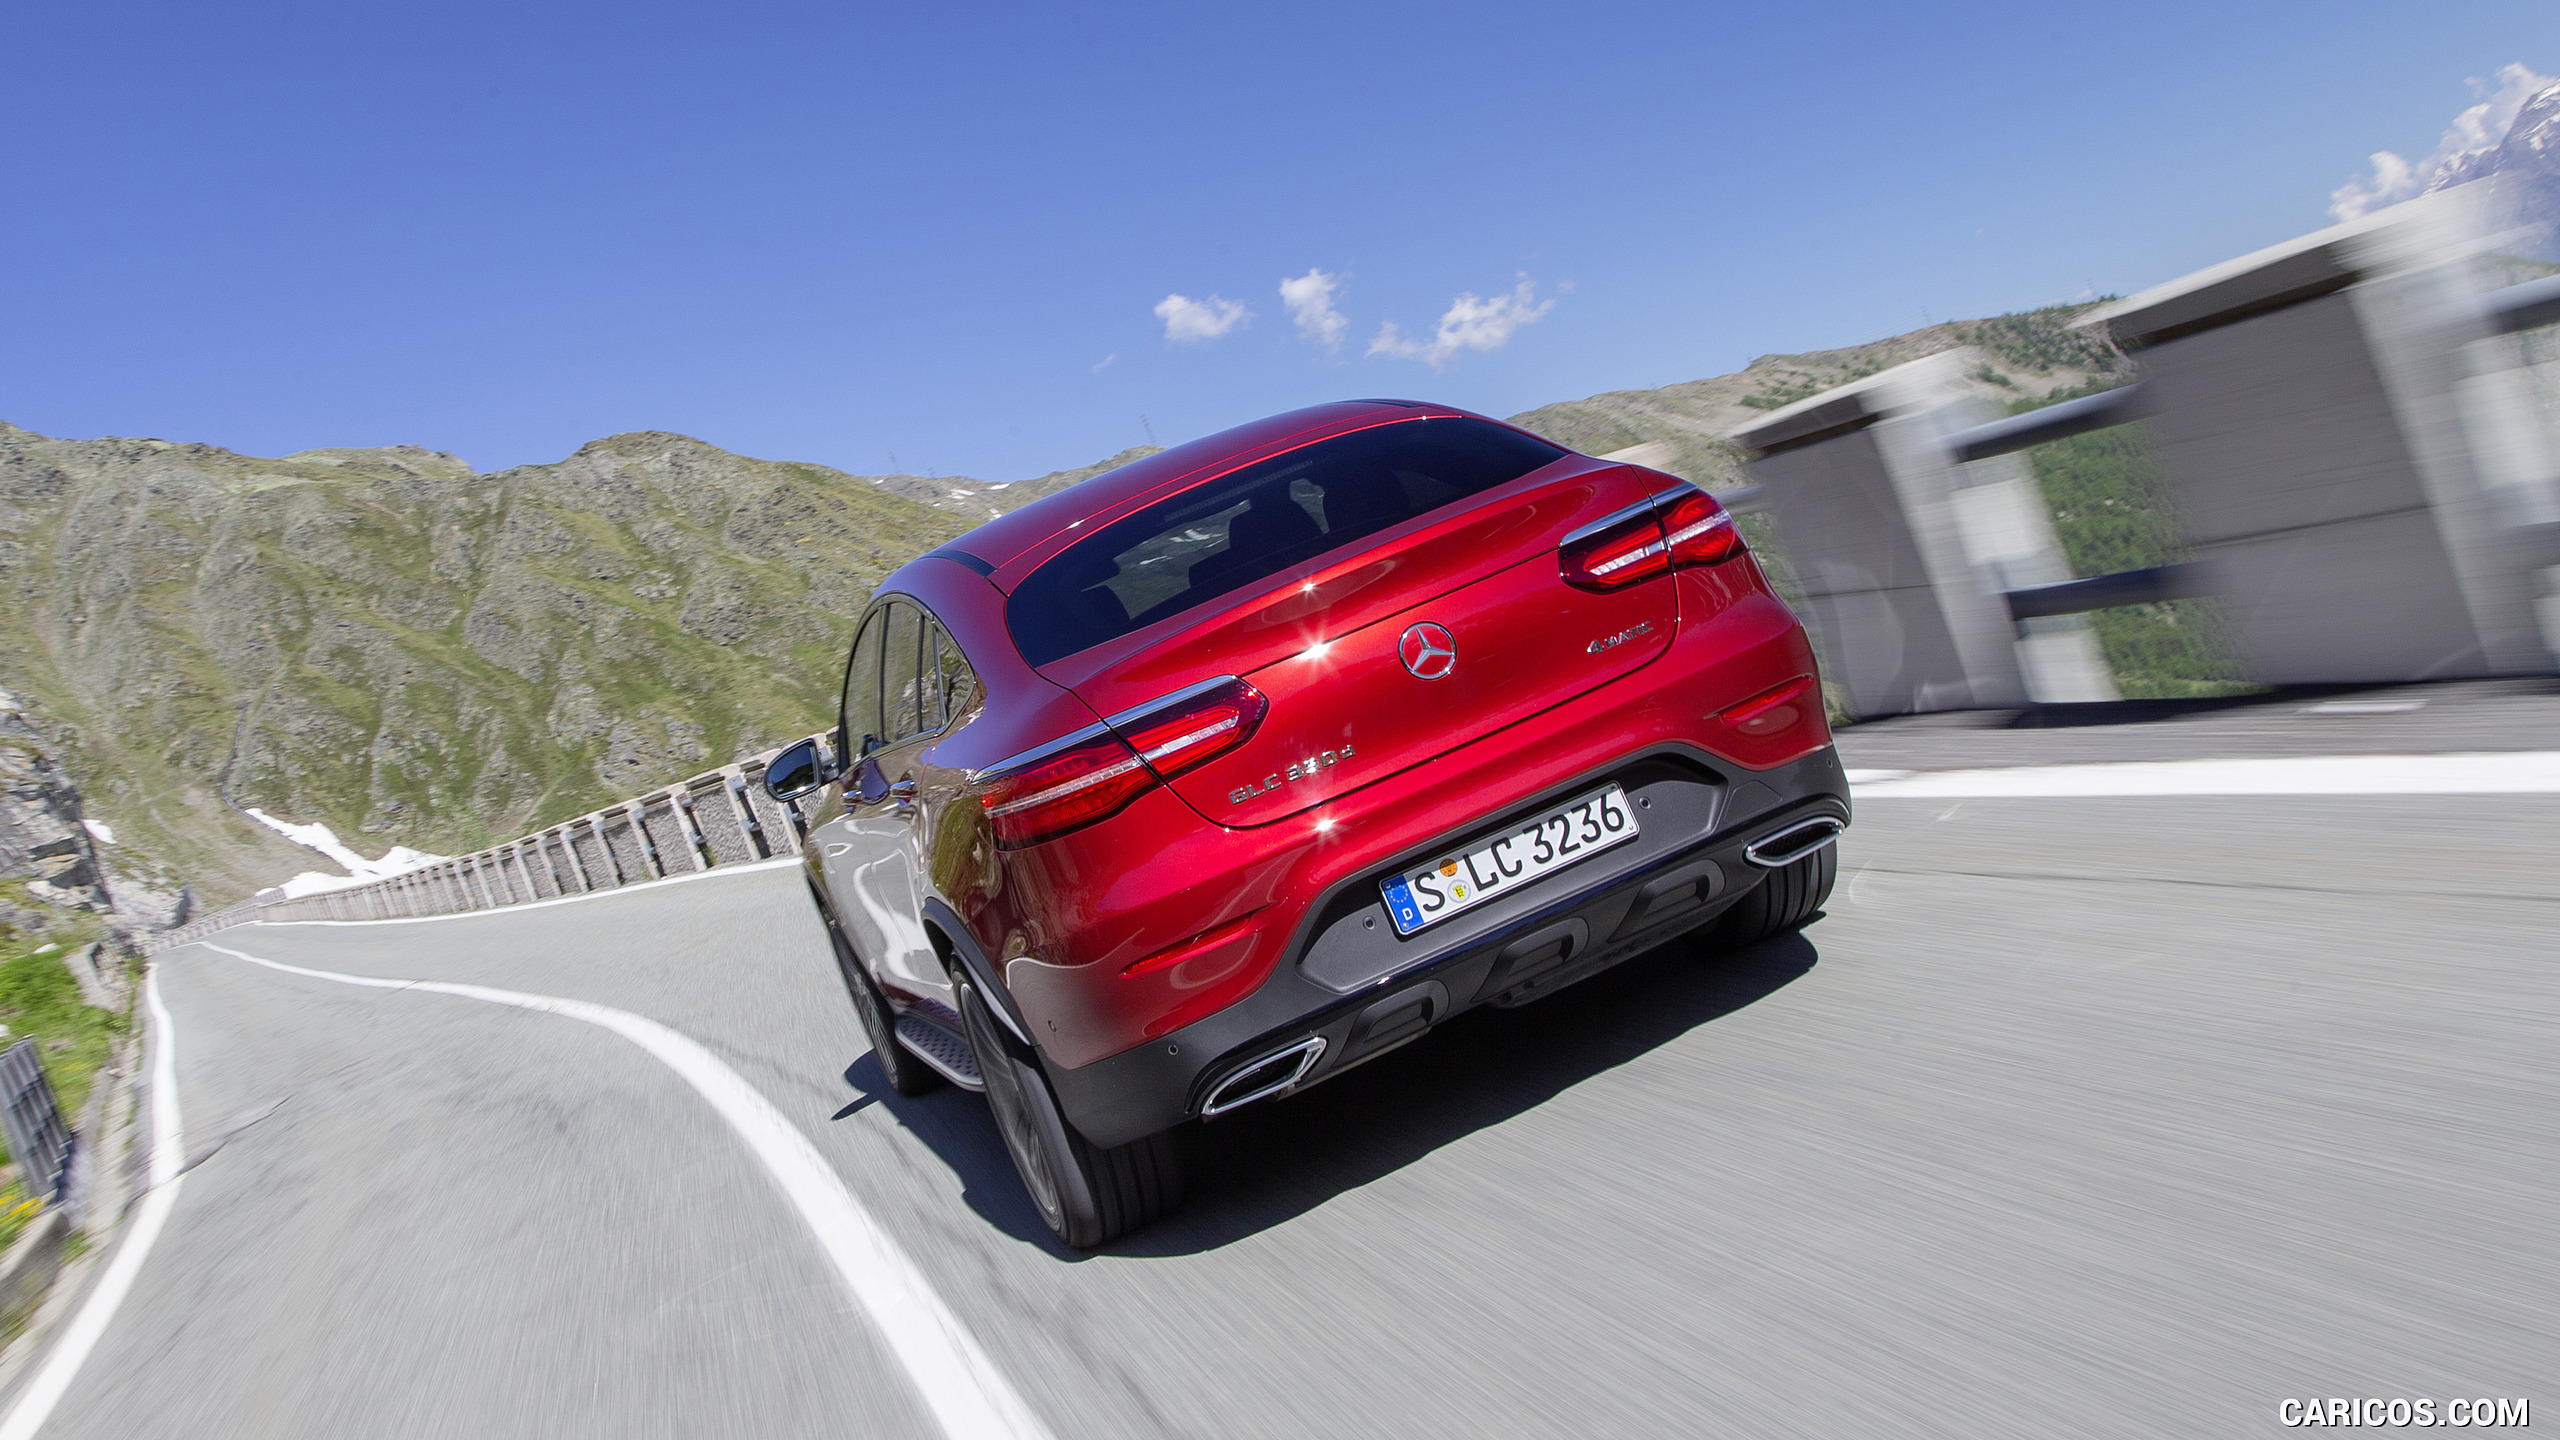 2017 Mercedes-Benz GLC 350 d Coupe (Diesel; Color: Hyacinth Red) - Rear, #66 of 144